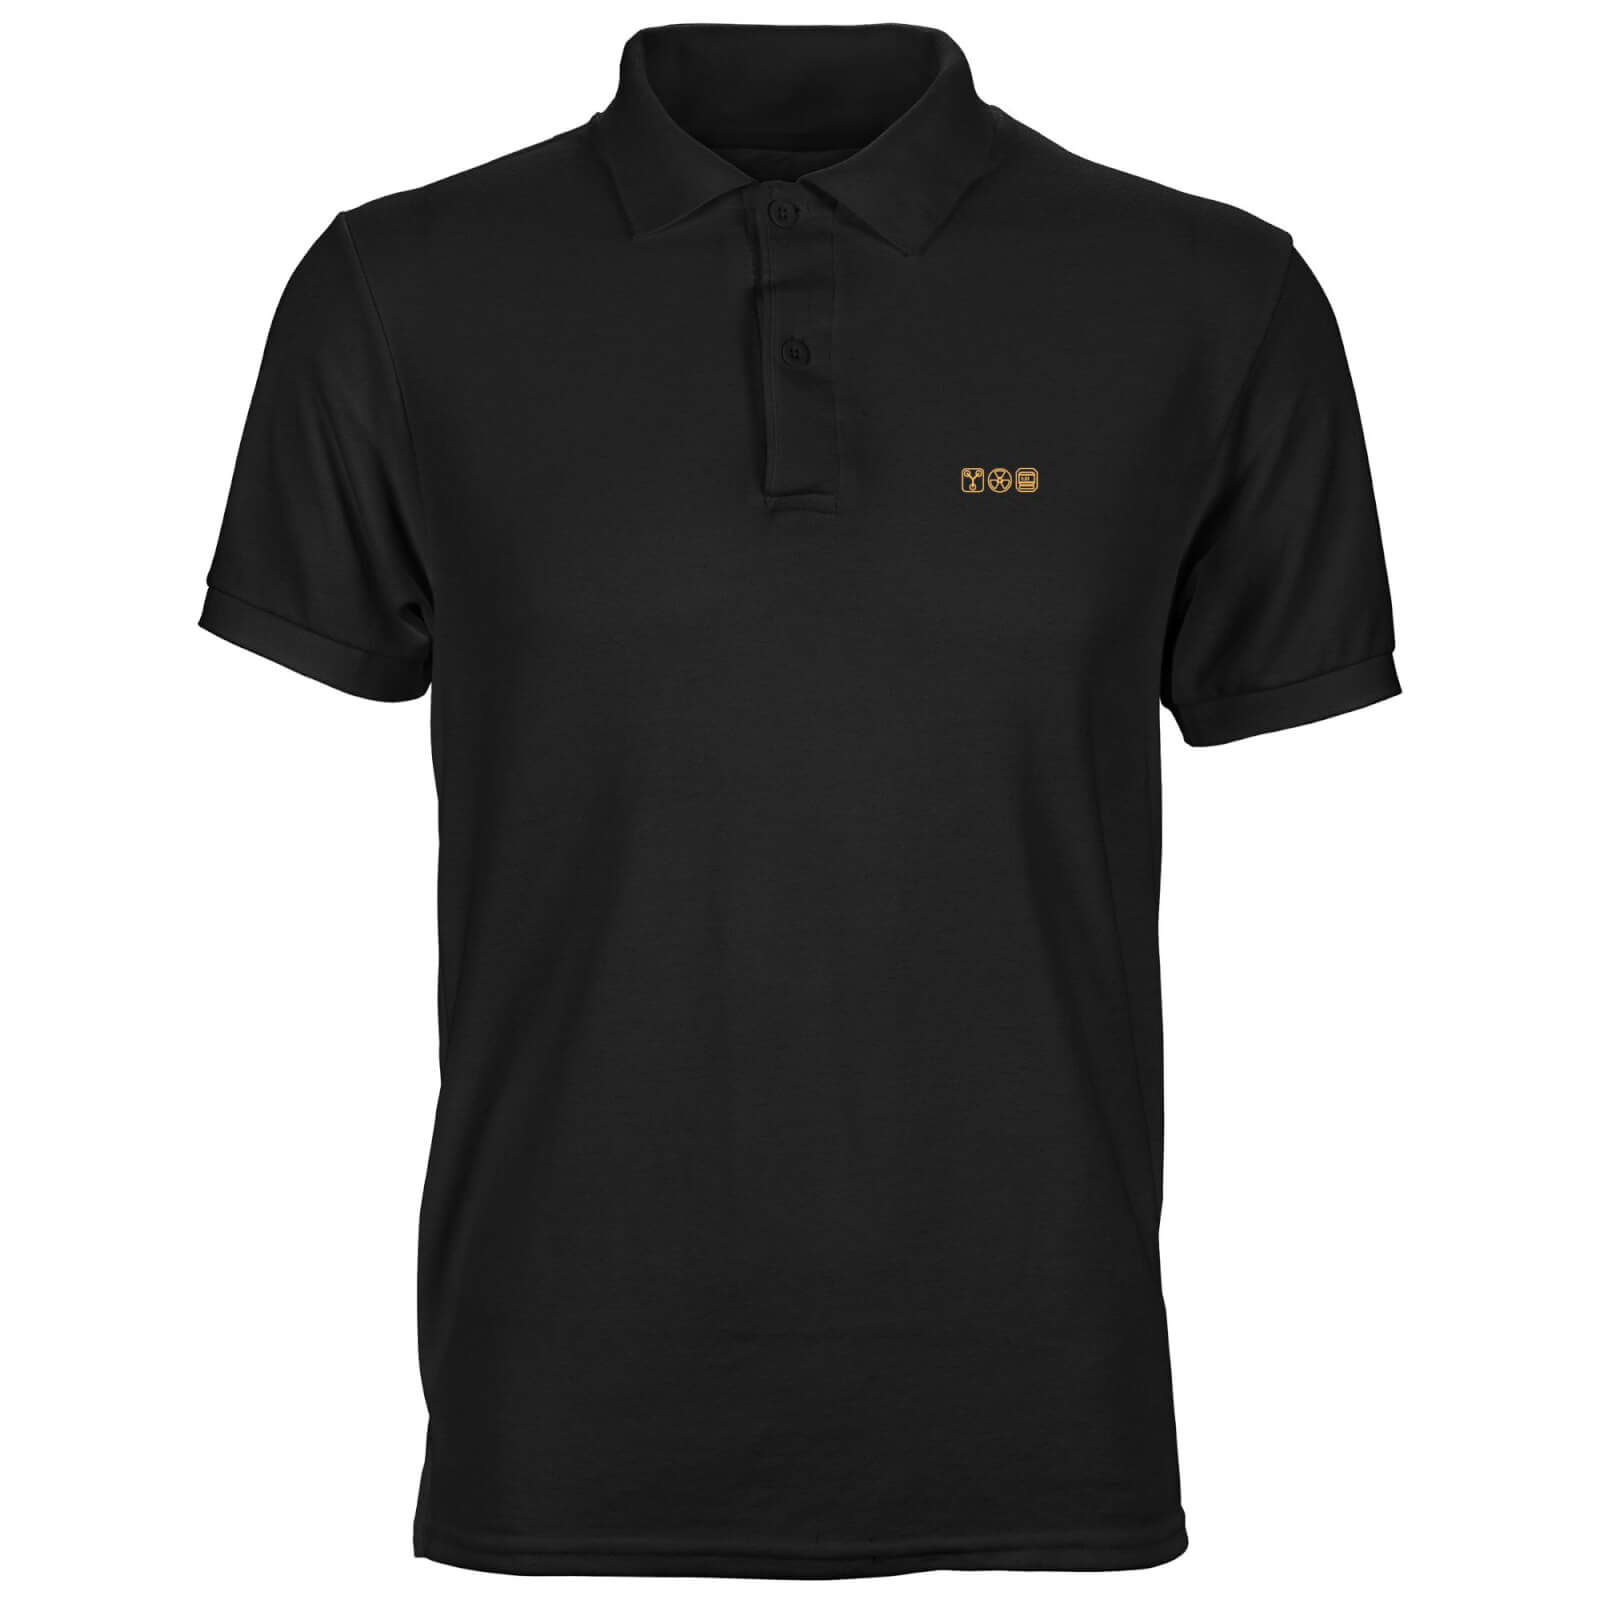 Back To The Future Icons Unisex Polo - Black - S - Noir